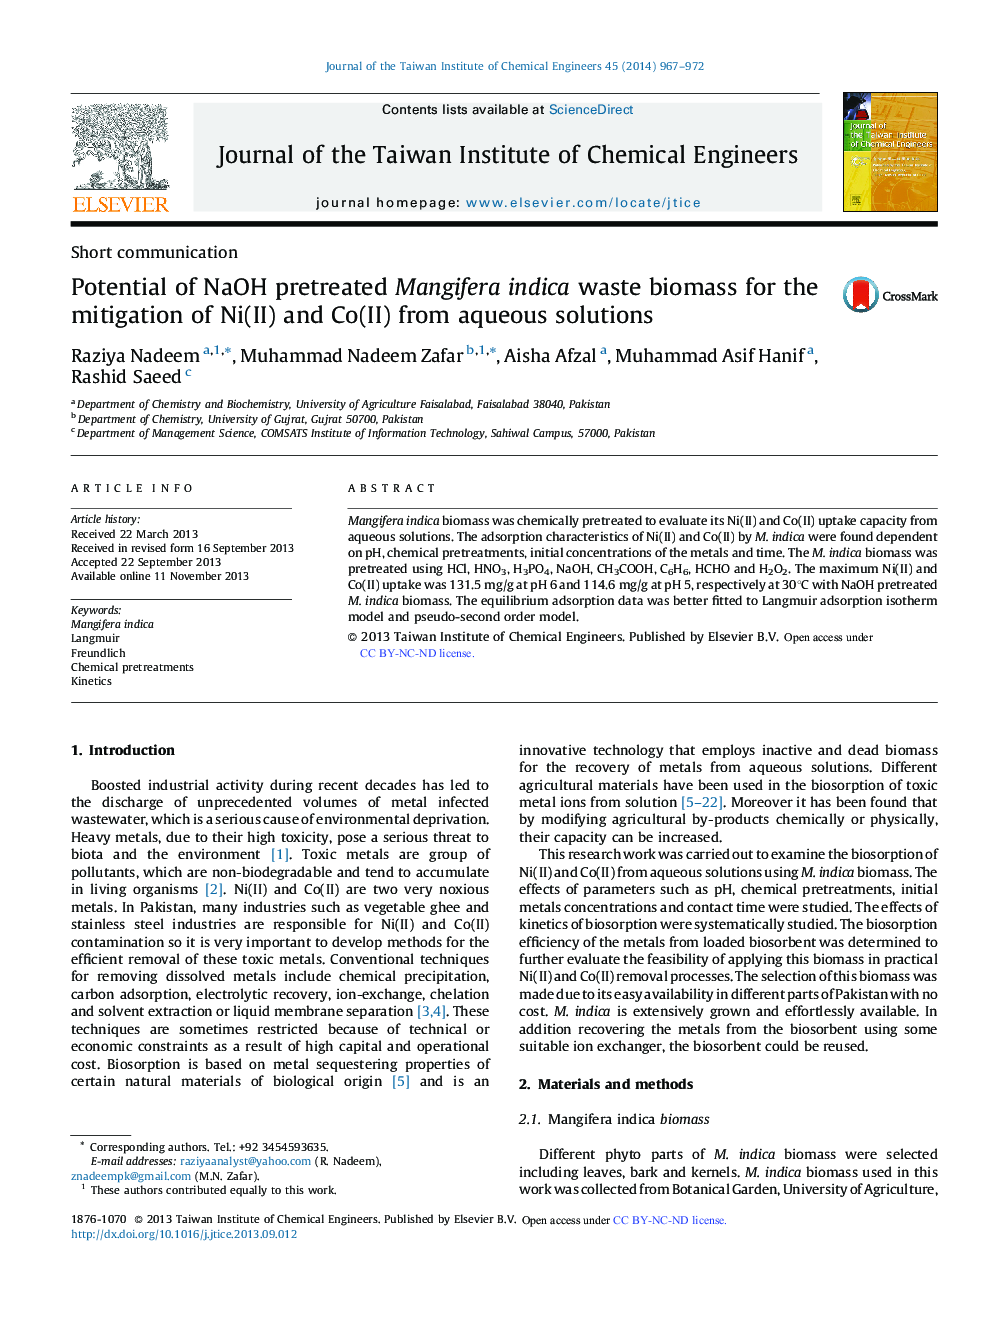 Potential of NaOH pretreated Mangifera indica waste biomass for the mitigation of Ni(II) and Co(II) from aqueous solutions